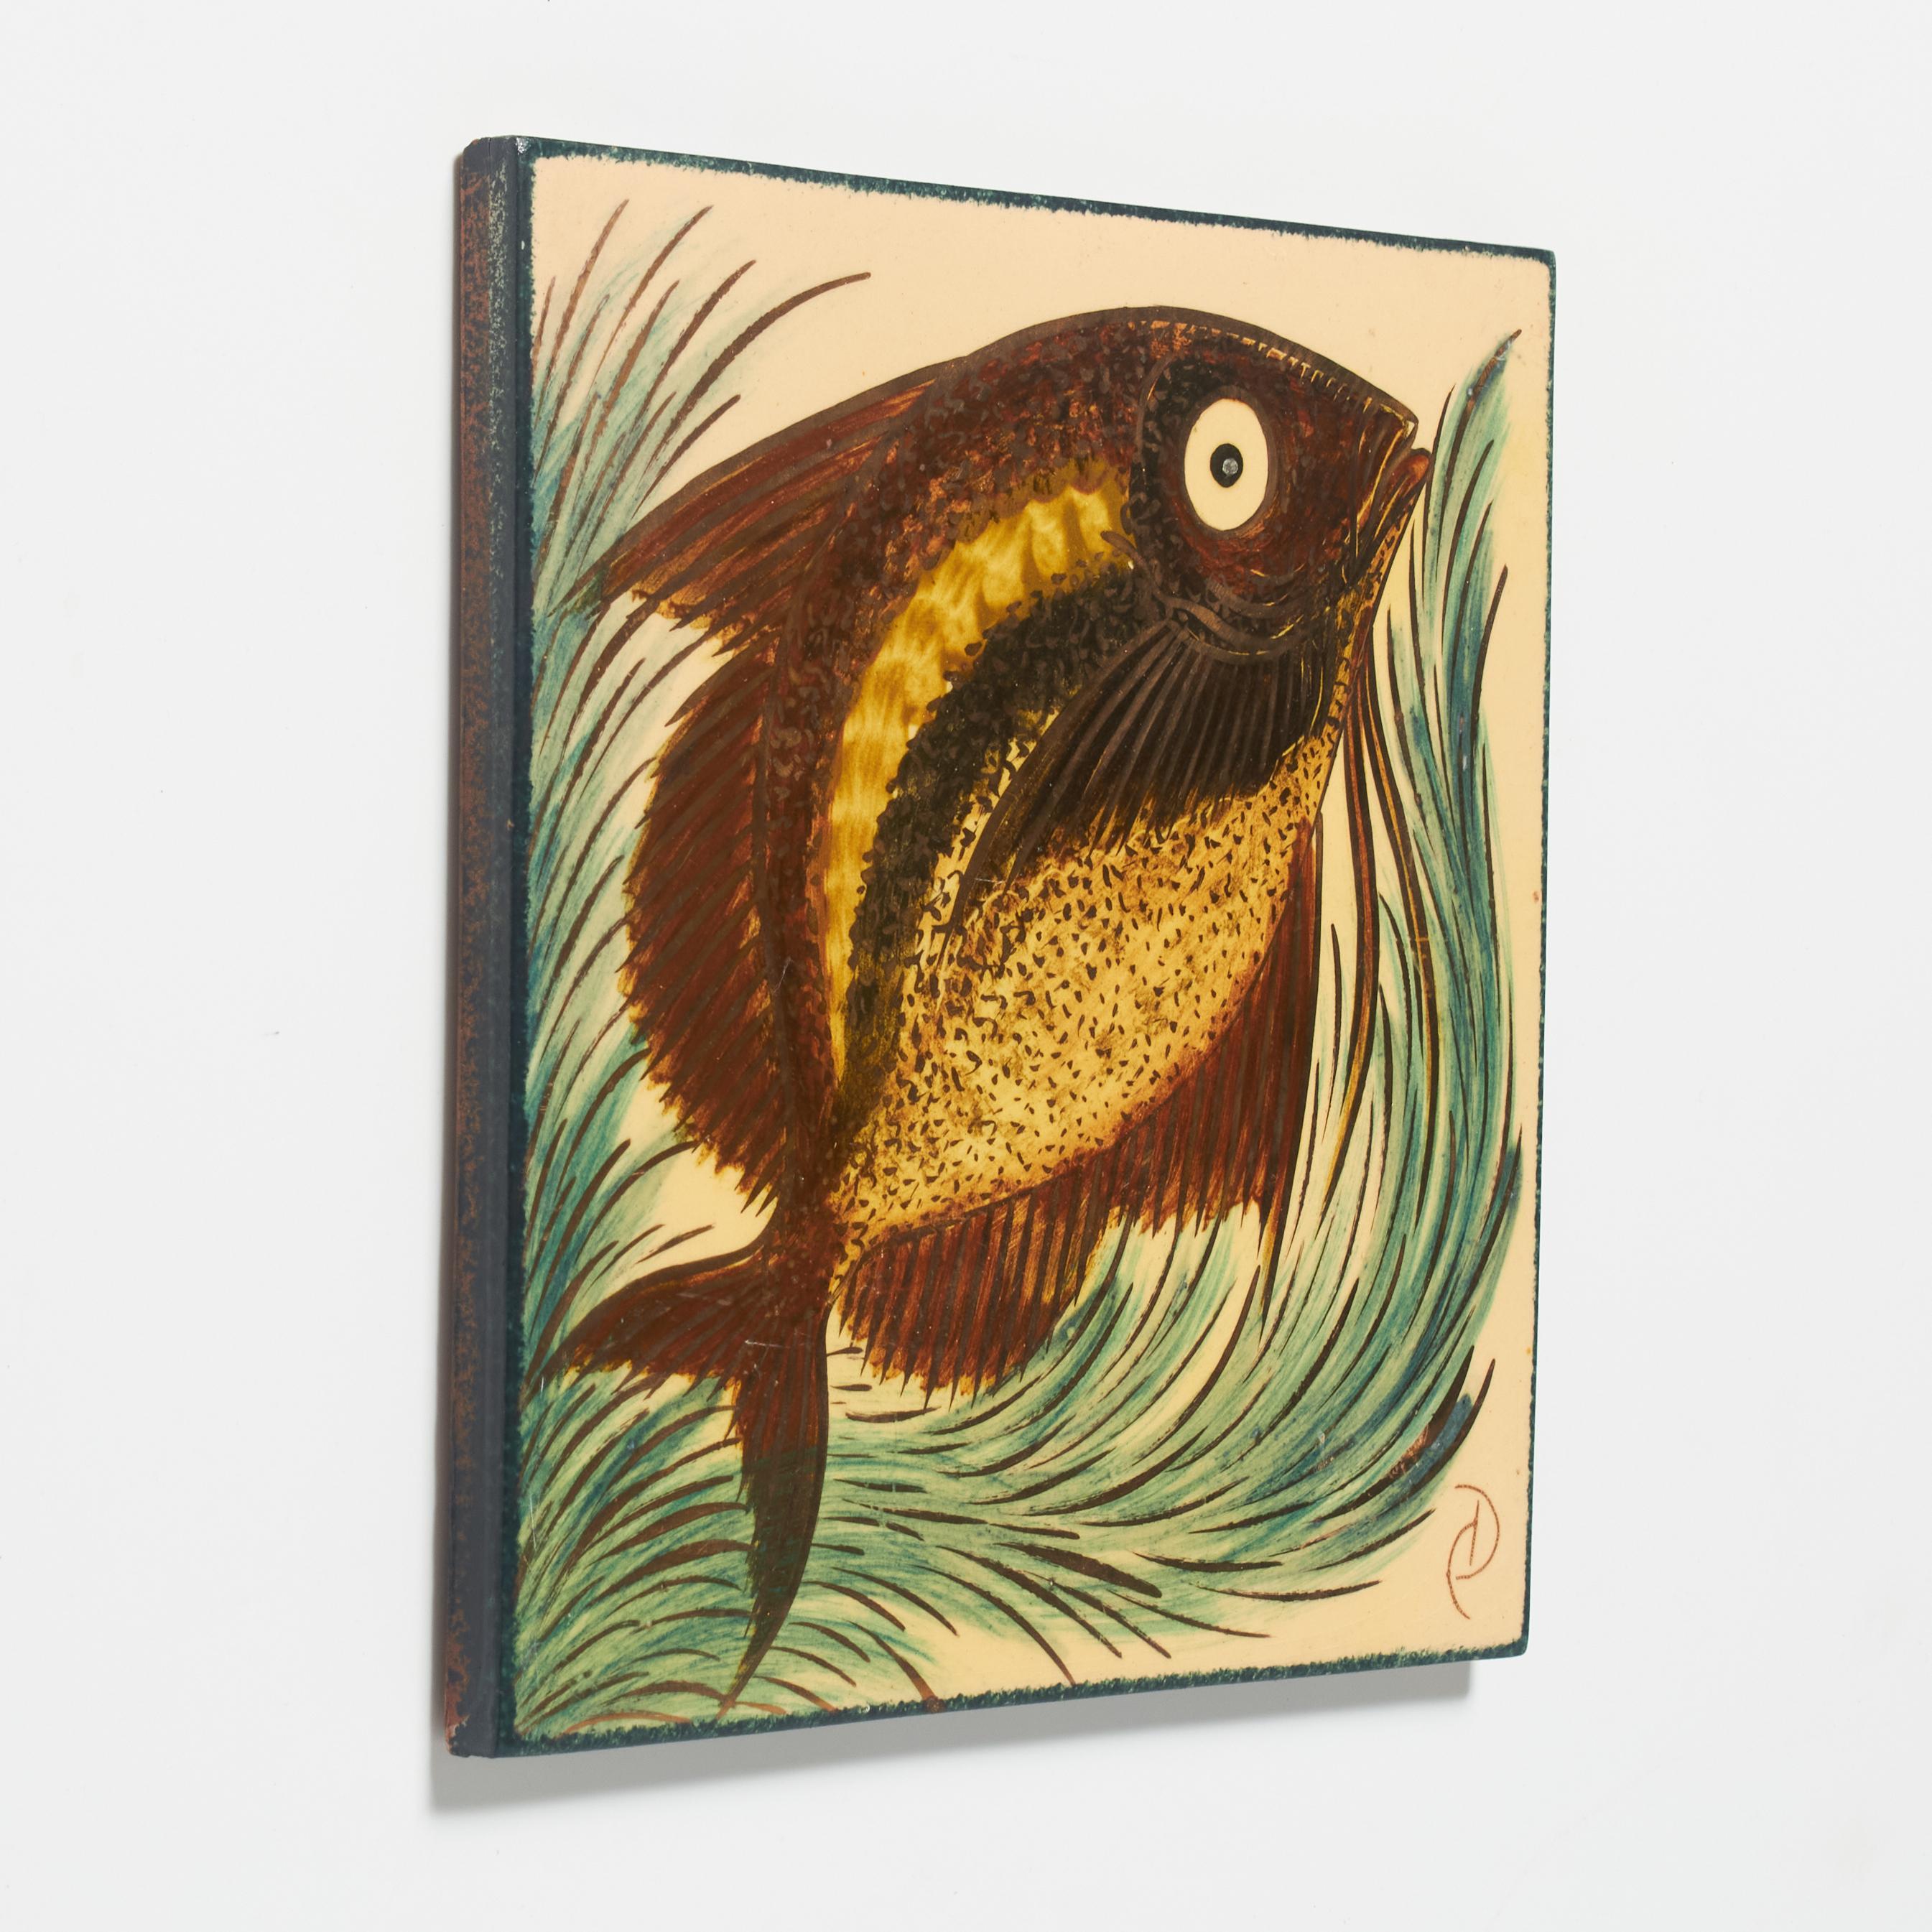 Mid-Century Modern Vintage 1960 Hand-Painted Ceramic Gold Fish Artwork by Catalan Artist Diaz Costa For Sale